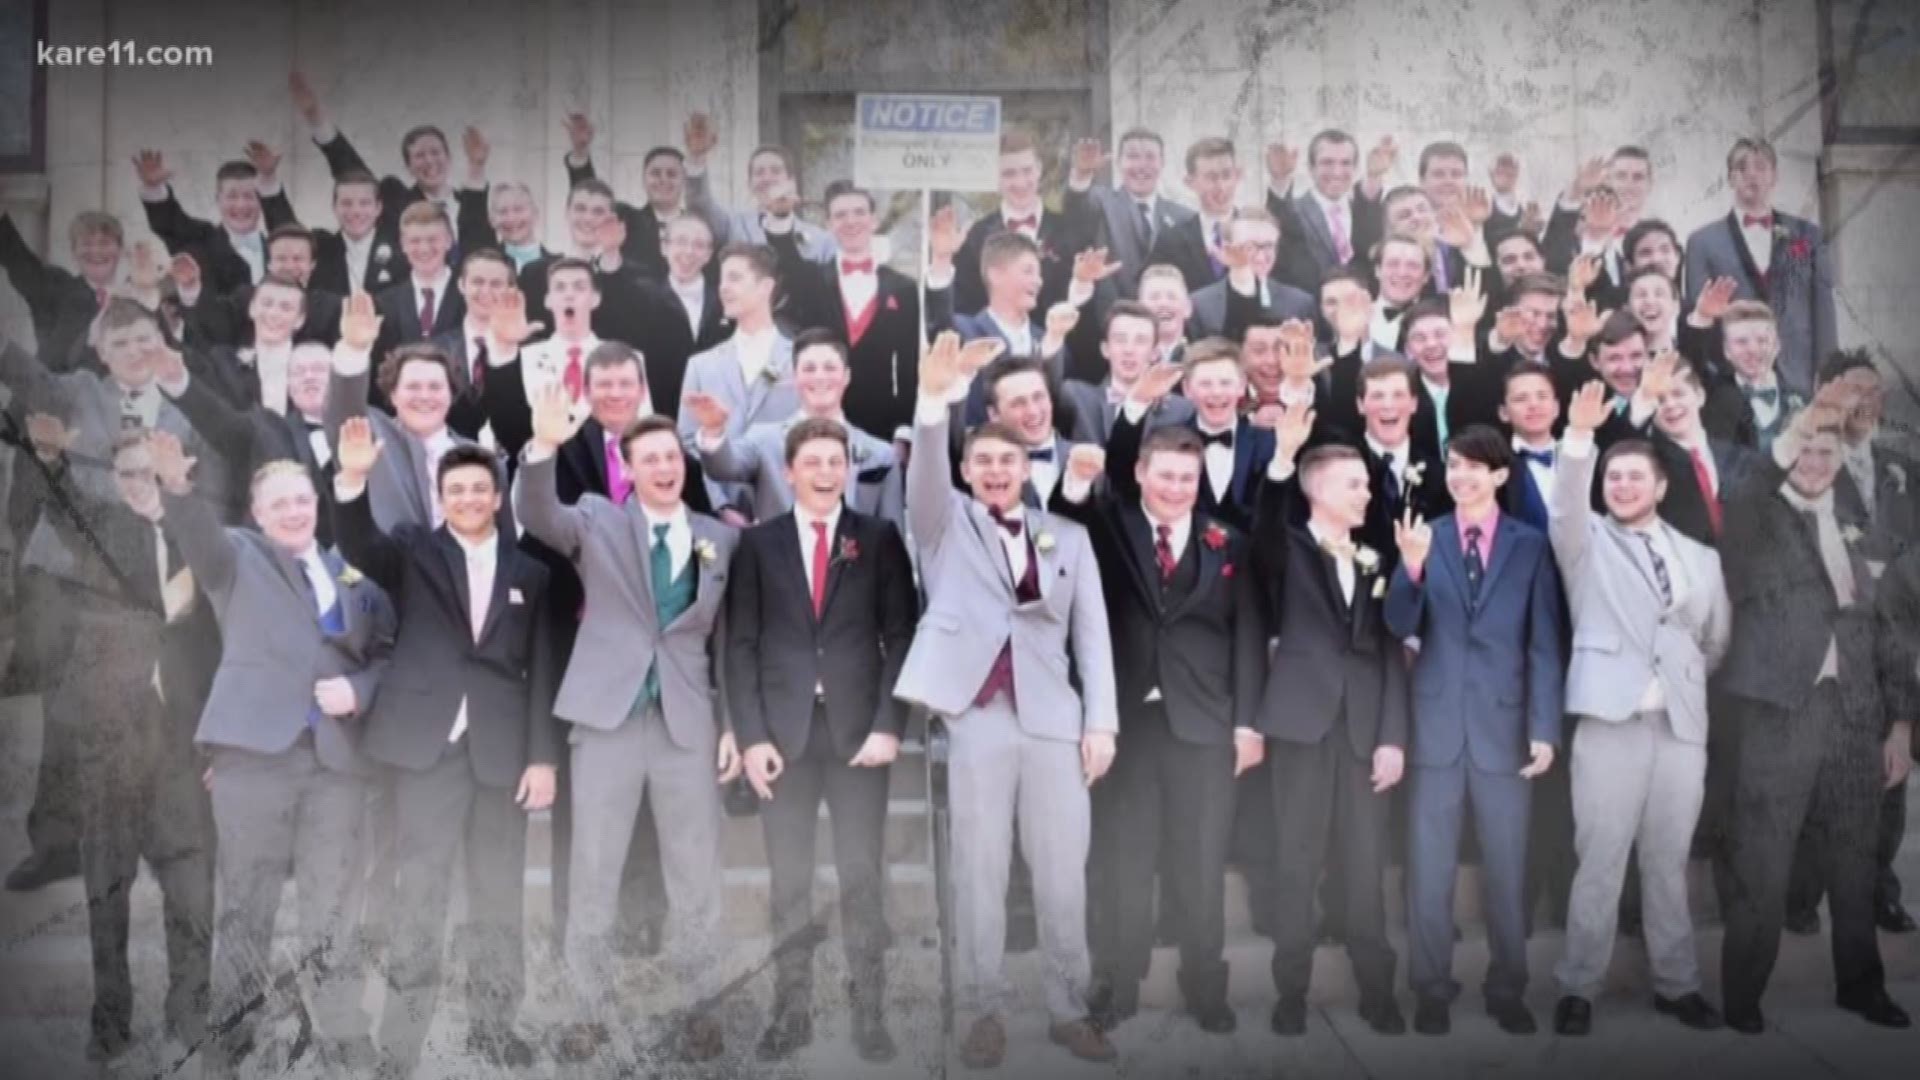 One infamous prom photo from Baraboo, Wisconsin has now turned that community upside down -- as one leader put it. That photo of about 50 high school students appearing to give the Nazi salute, while laughing, has not just enraged the community but apparently galvanized the racists there too. Just this week, racist and anti-Semitic flyers have been put up outside a middle school, a racist video released online, along with a threat of violence.